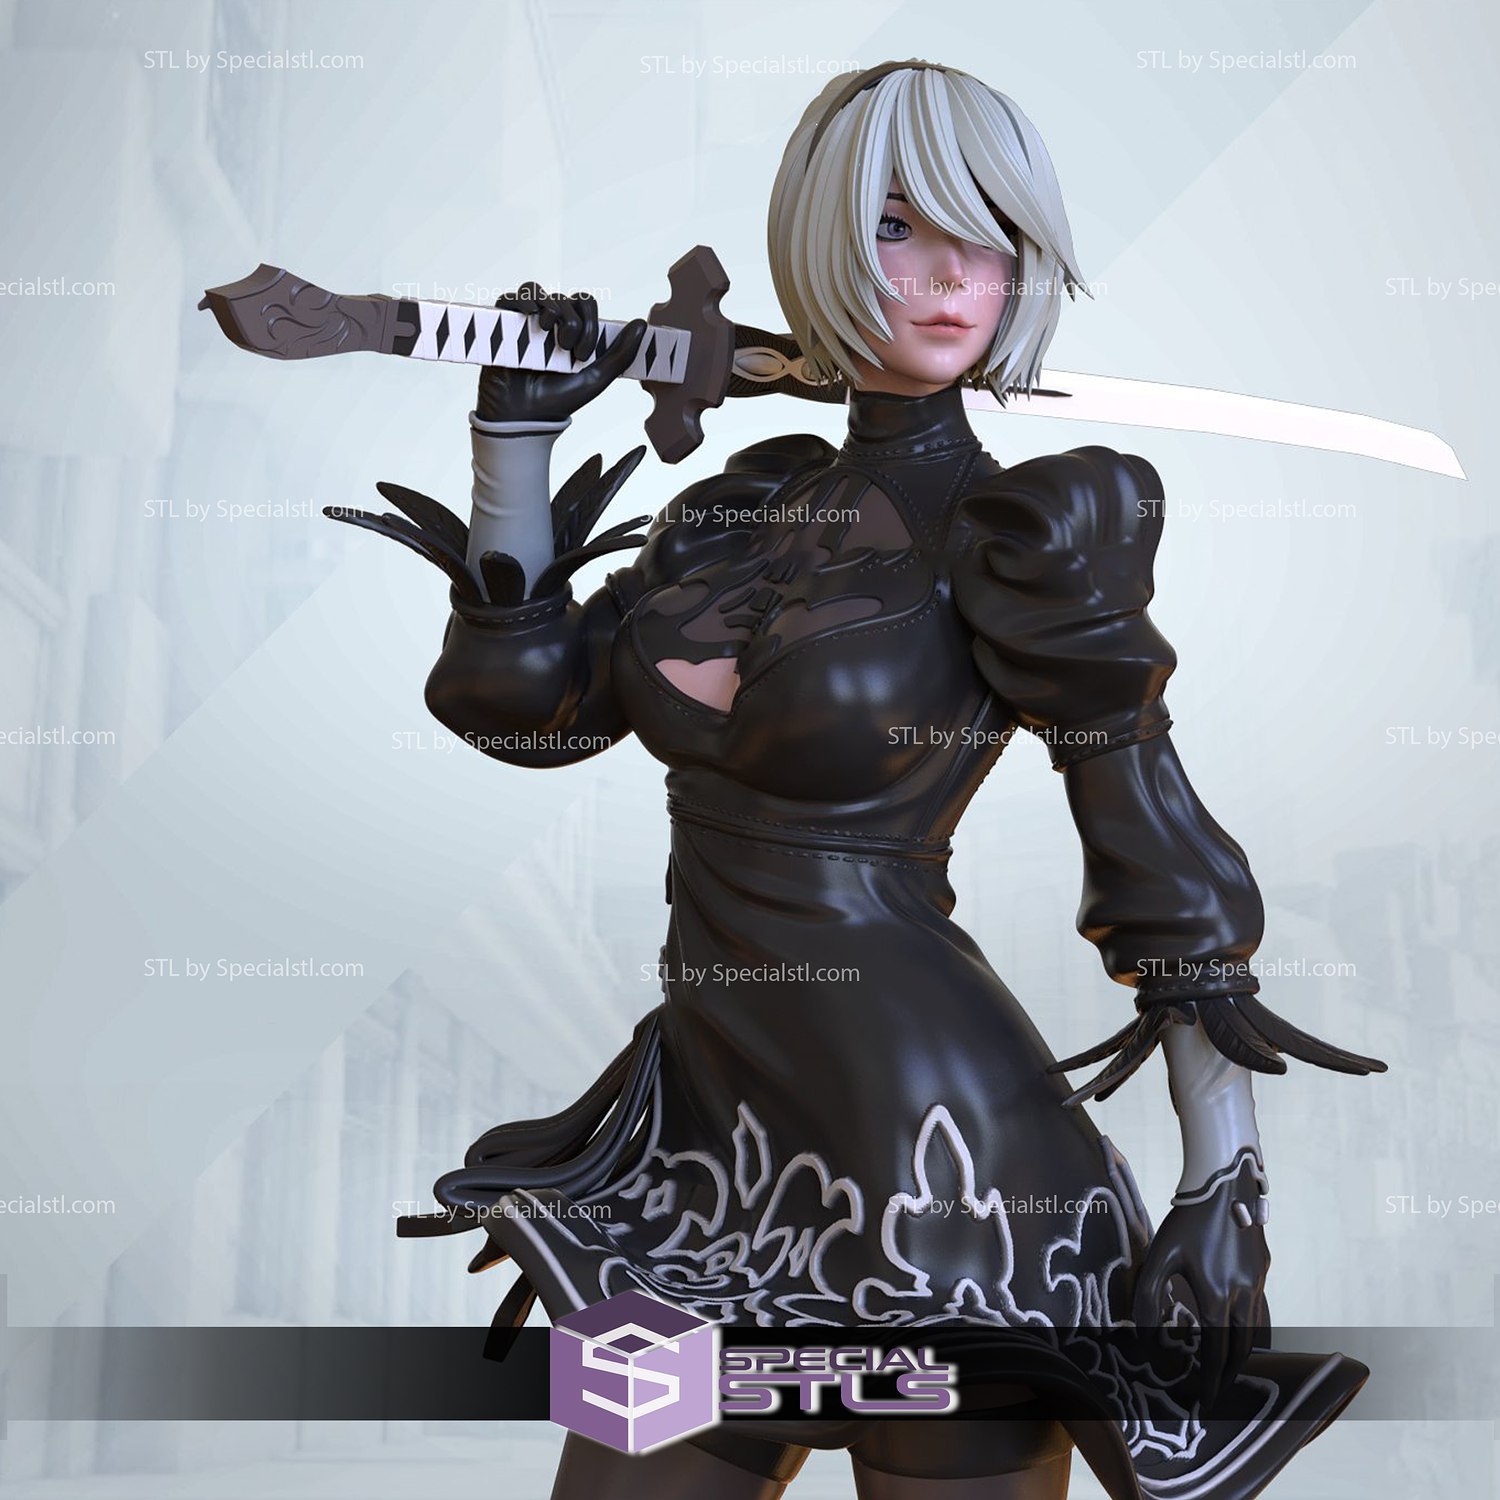 2b Nsfw From Nier Automata Specialstl